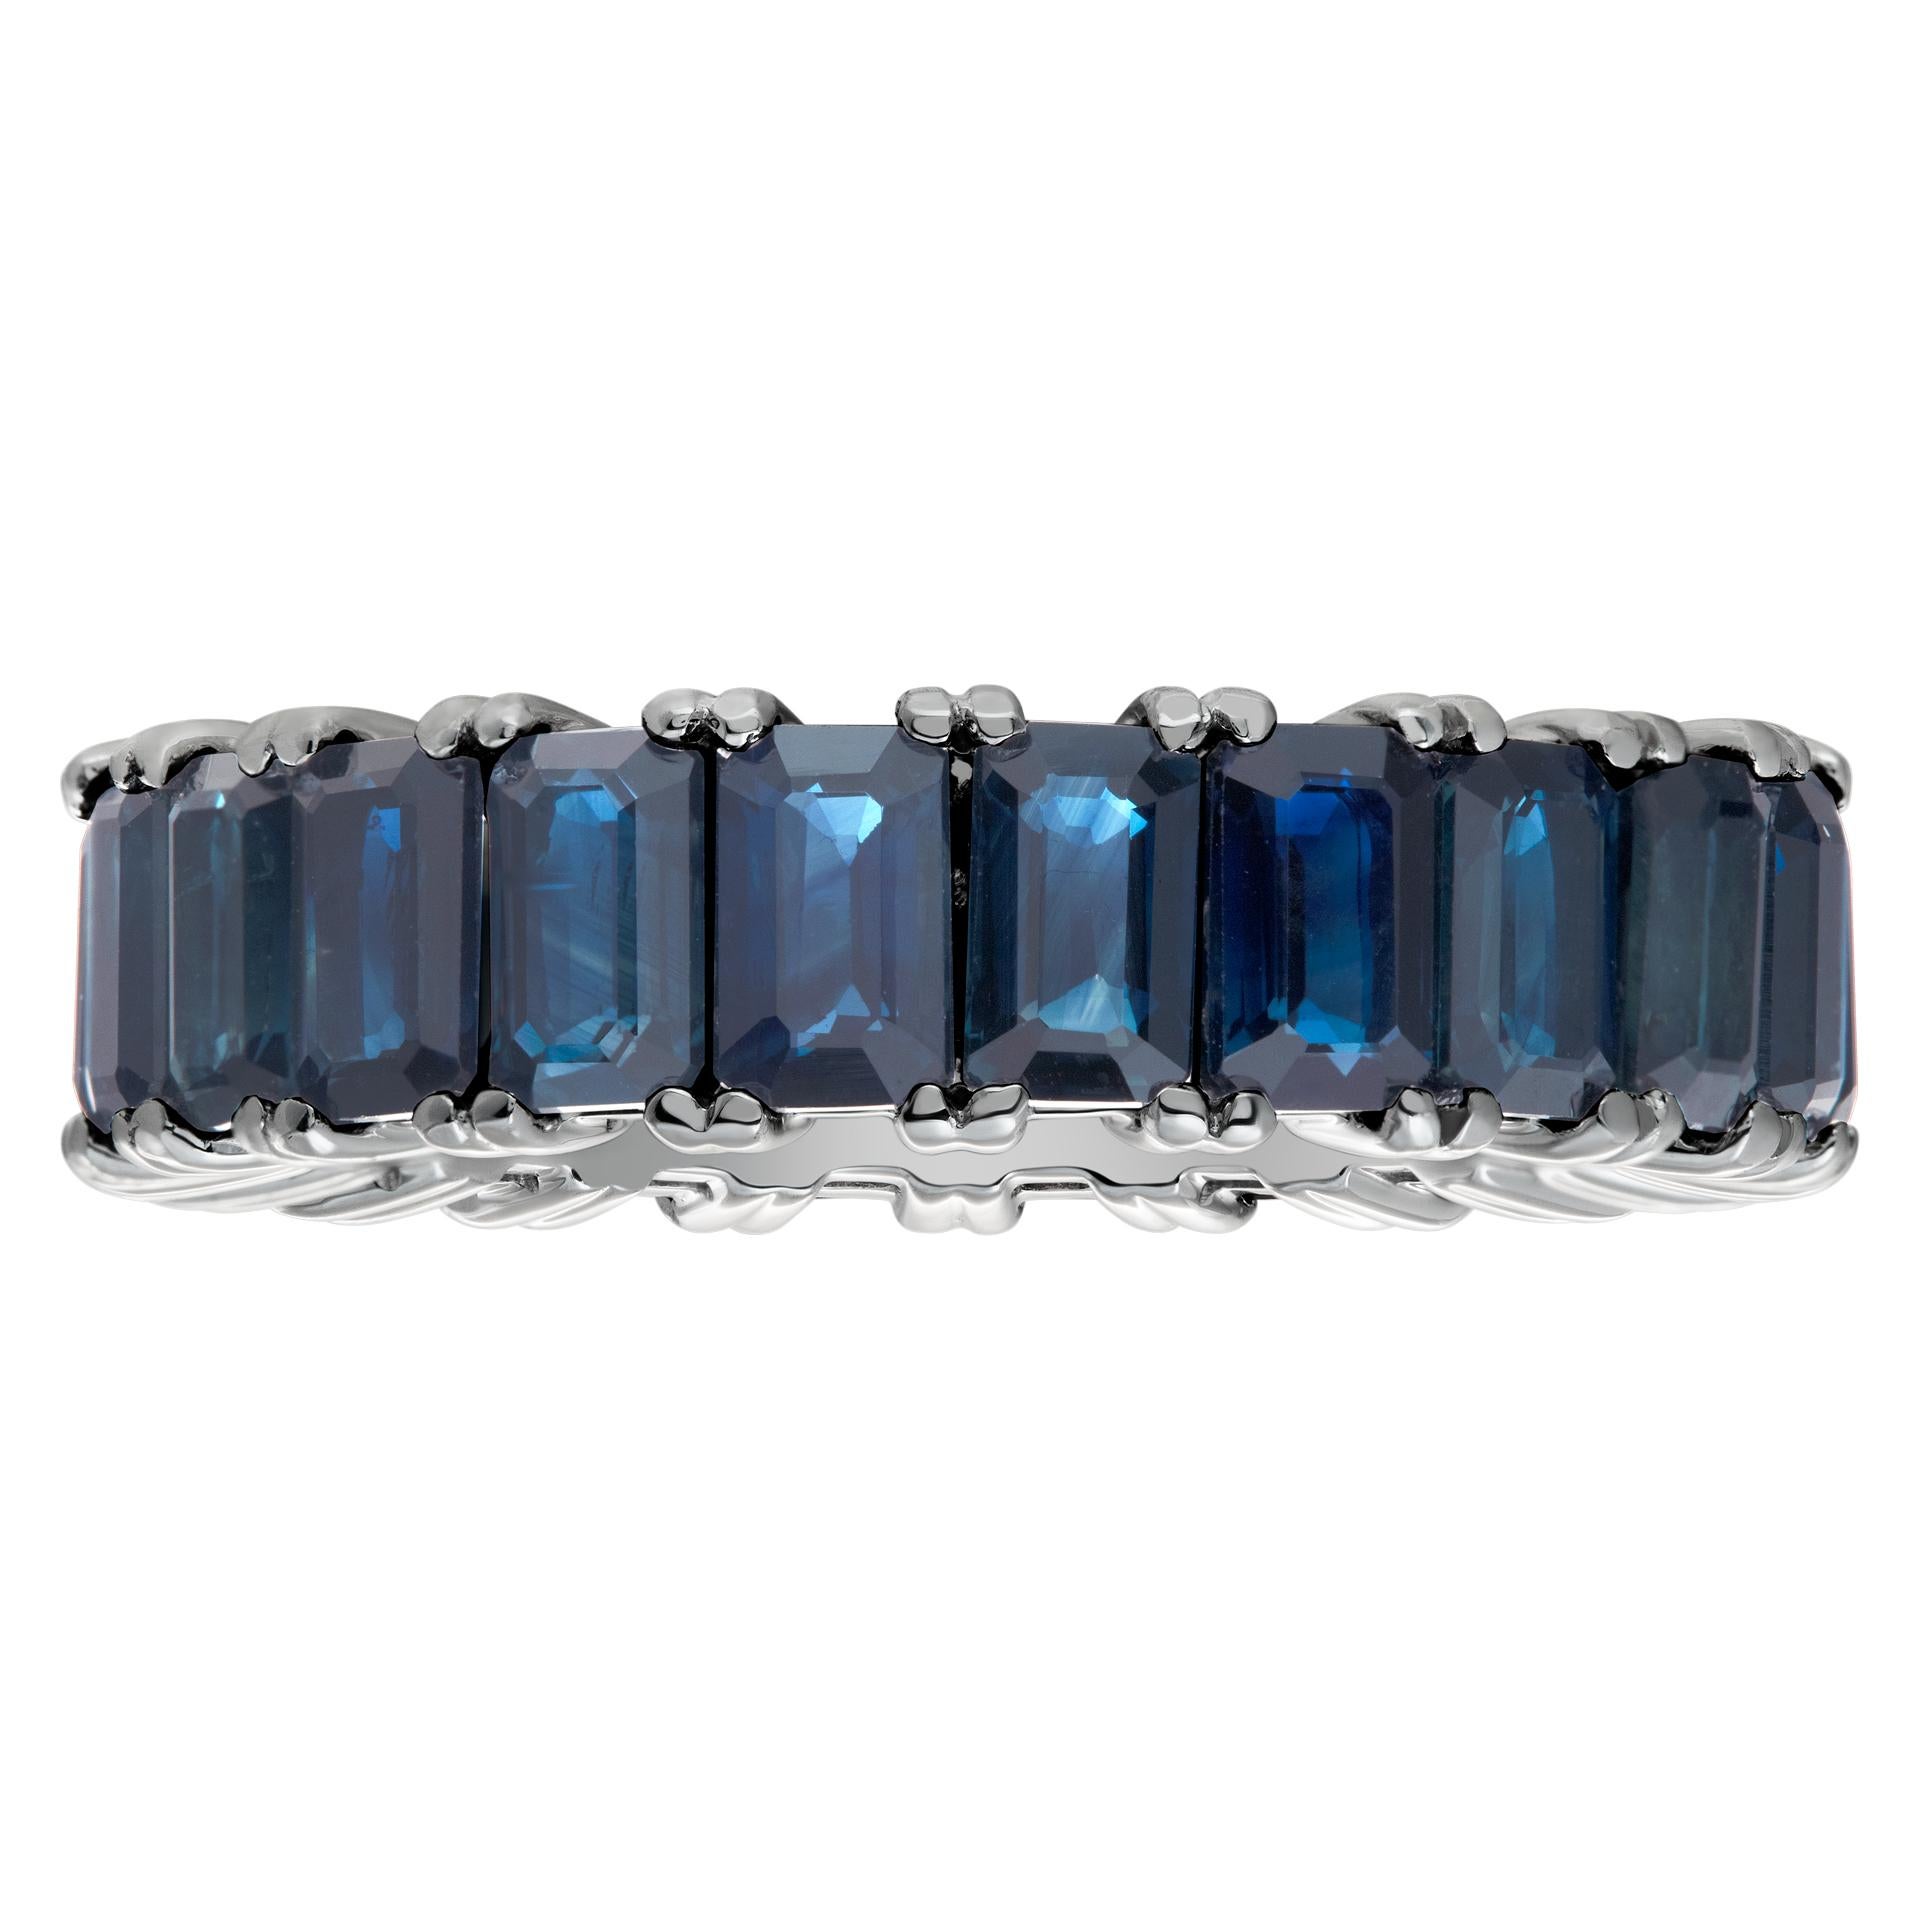 Dark blue sapphire eternity band in 14k white gold with 7.85 carats in rectangular cut blue sapphires. Size 7
